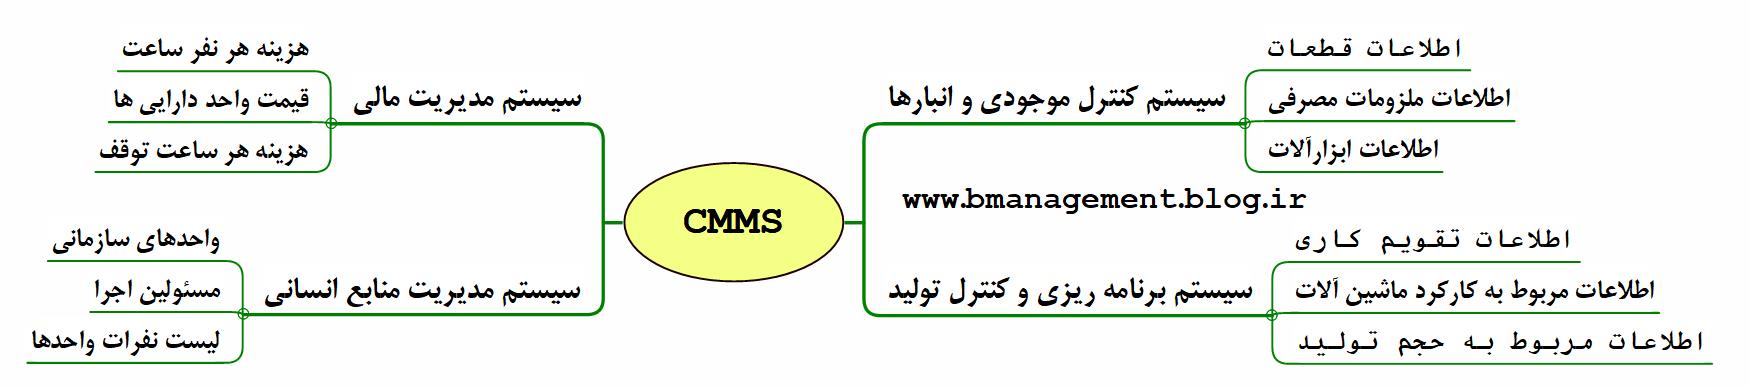 CMMS with other system